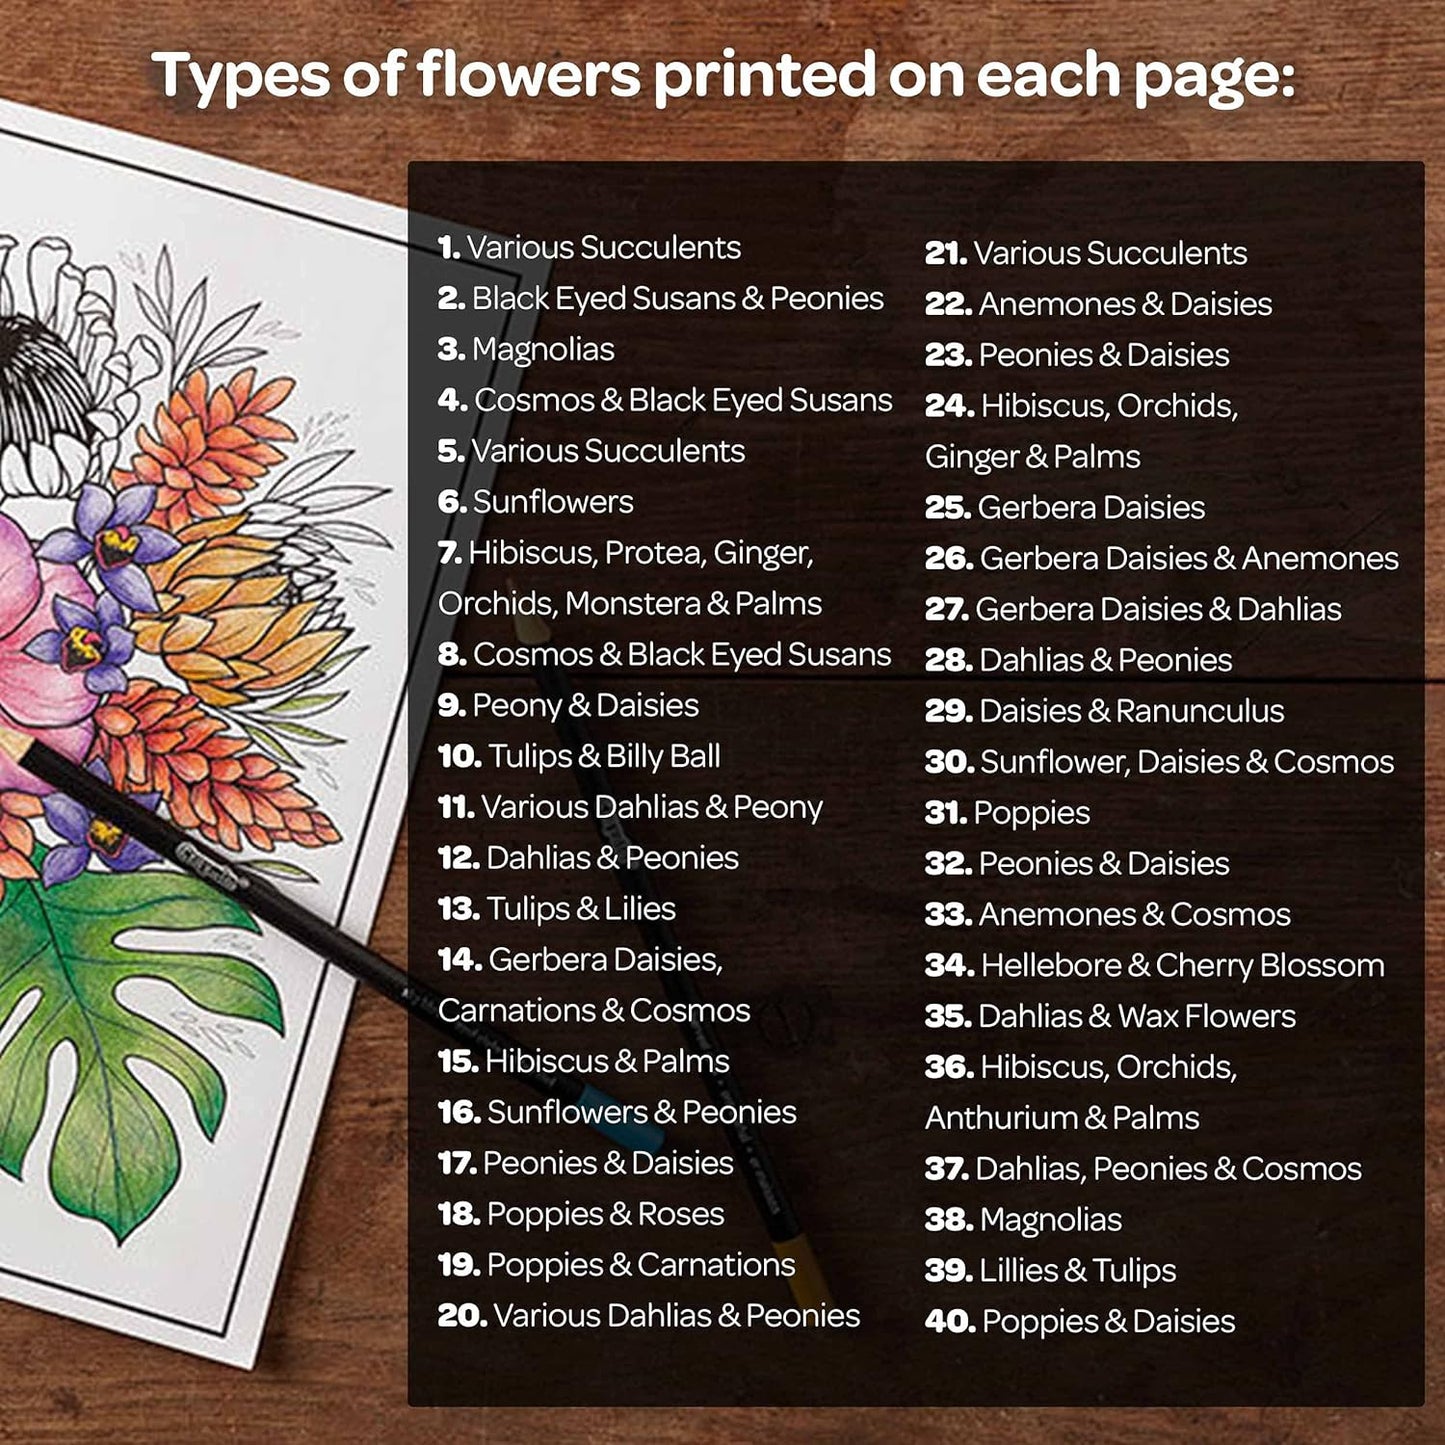 Crayola Coloring Book - Colors in Bloom (40 pages)